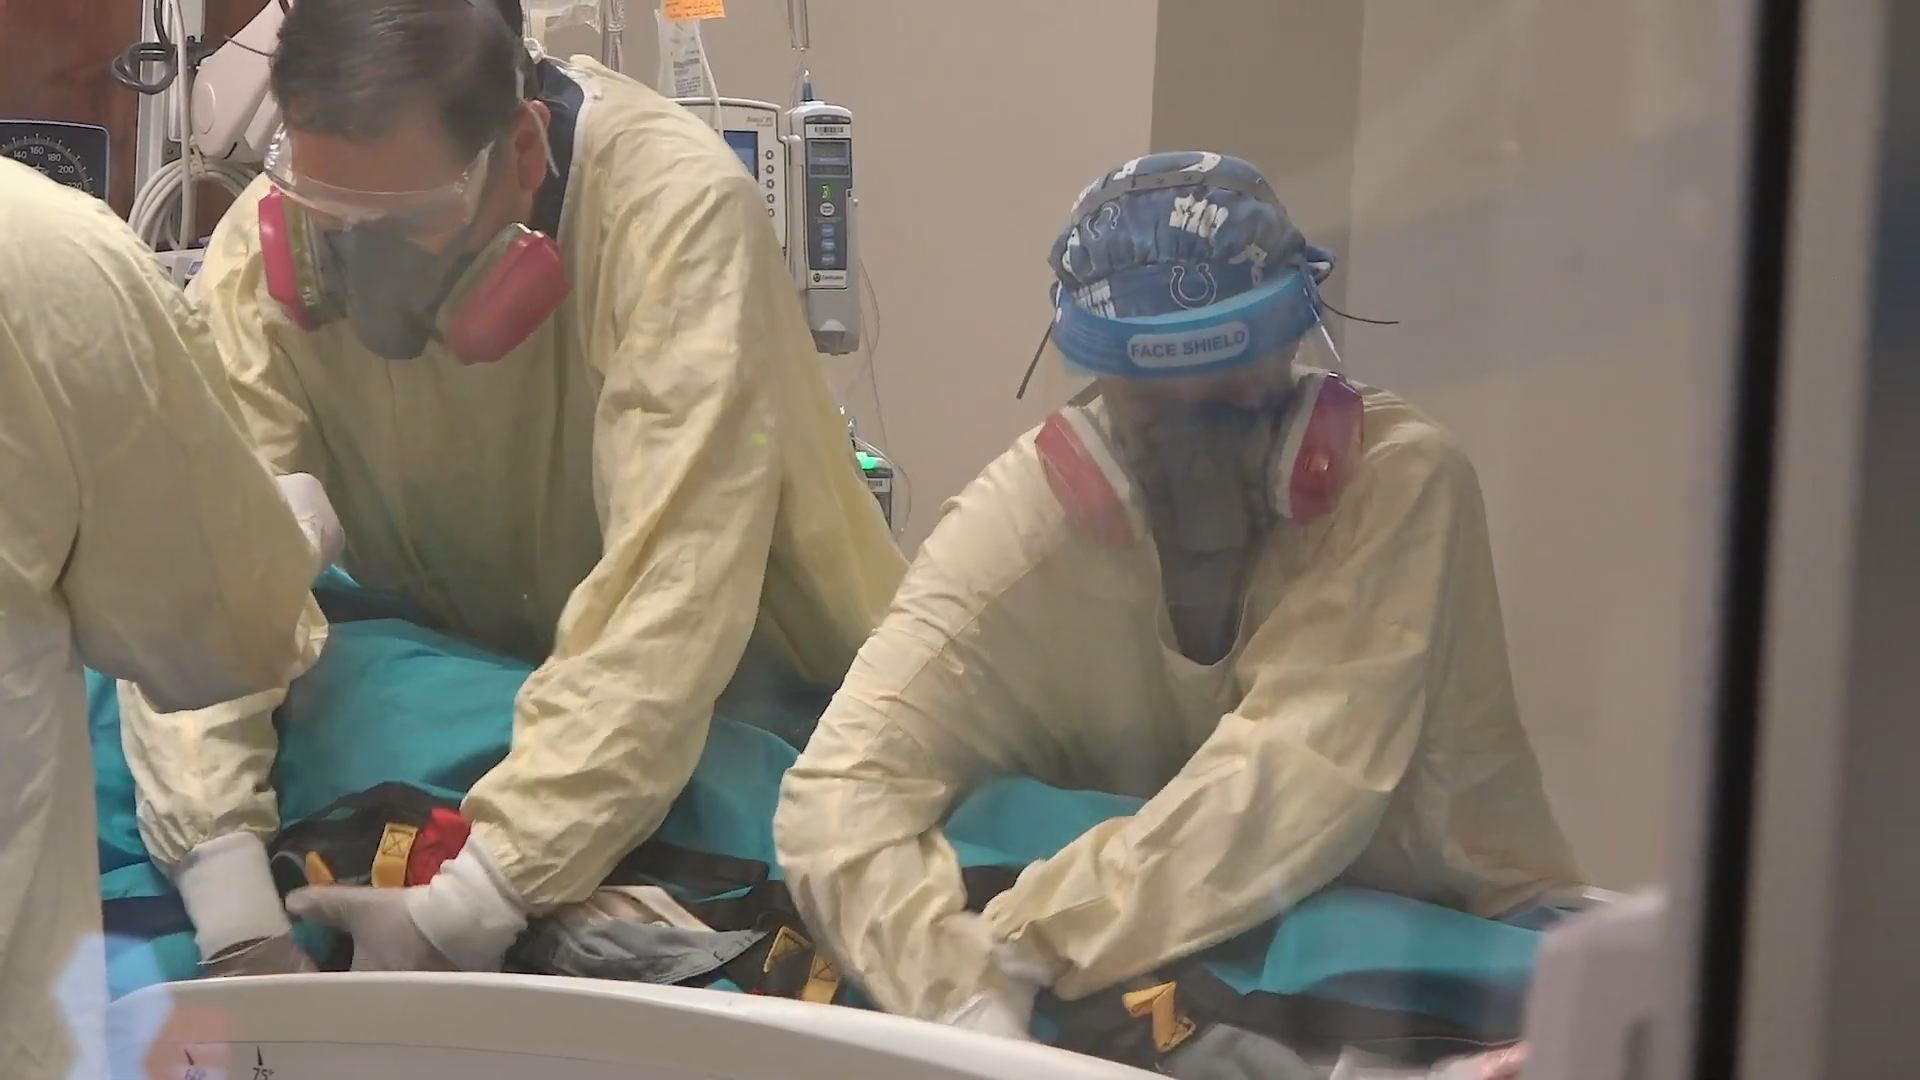 13News got a rare look at what life and work is like for frontline healthcare workers as the coronavirus pandemic continues to hospitalize and kill Hoosiers.